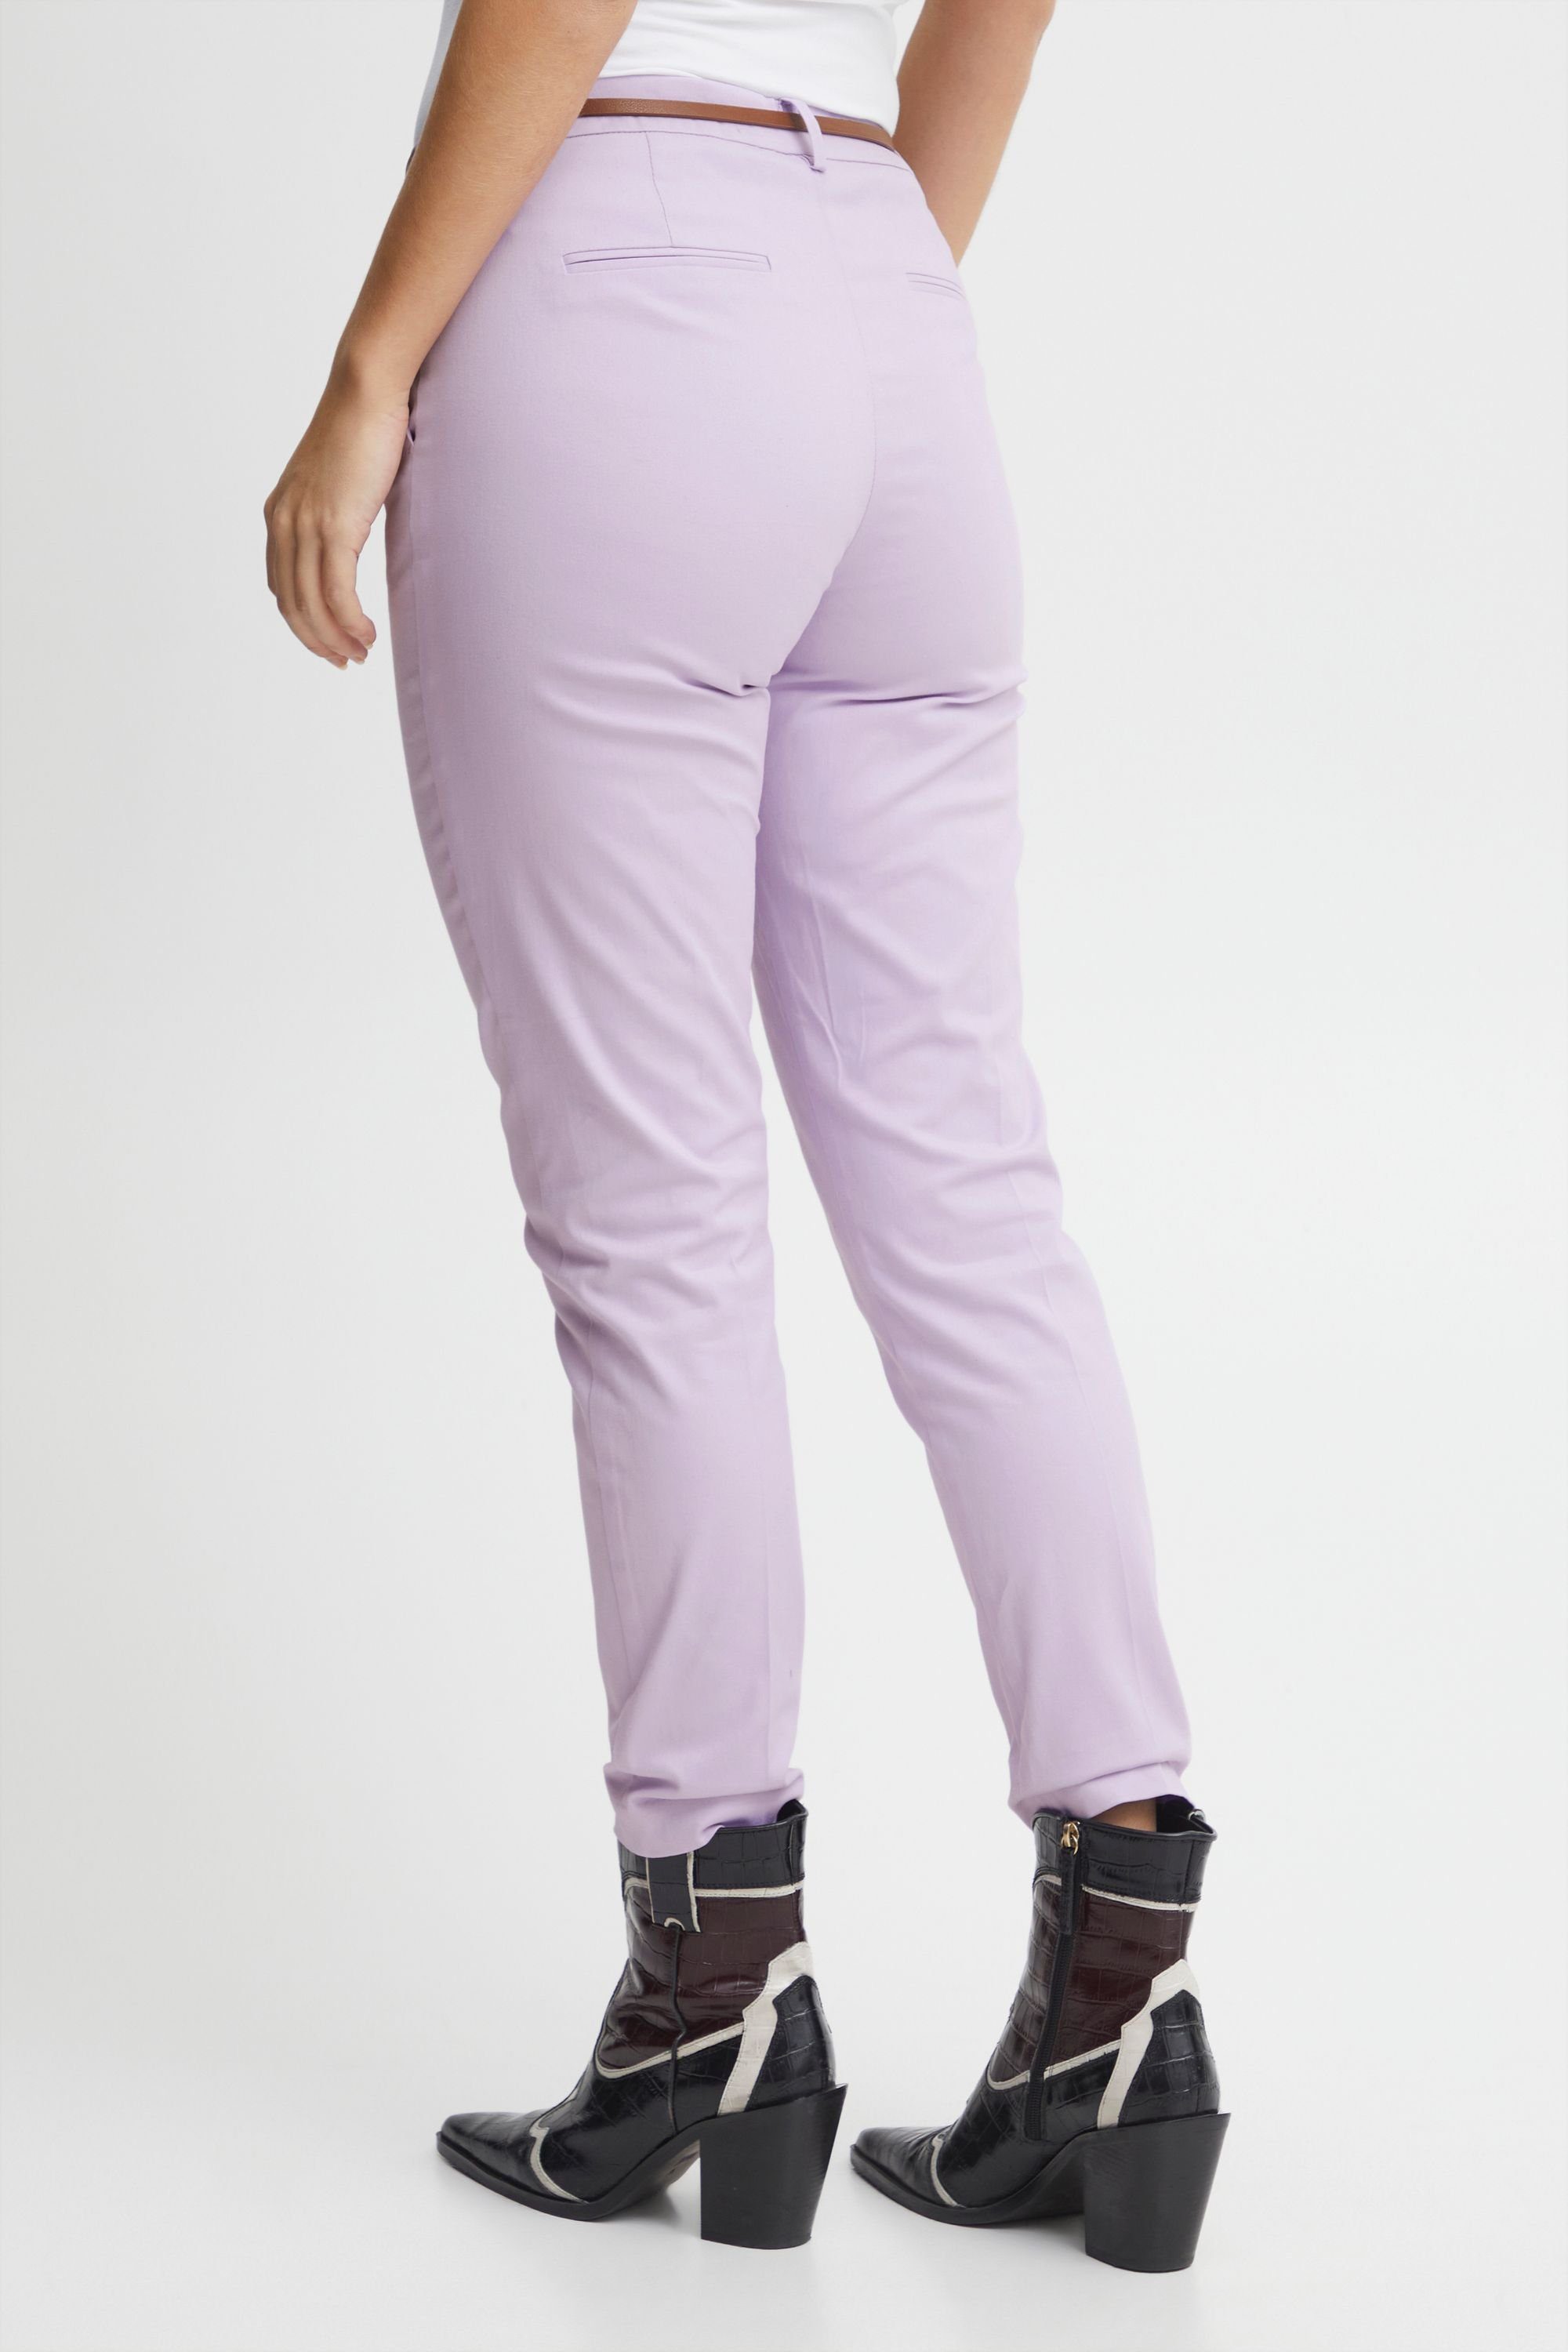 b.young Chinohose BYDays cigaret Rose (153716) - pants Purple 20803473 2